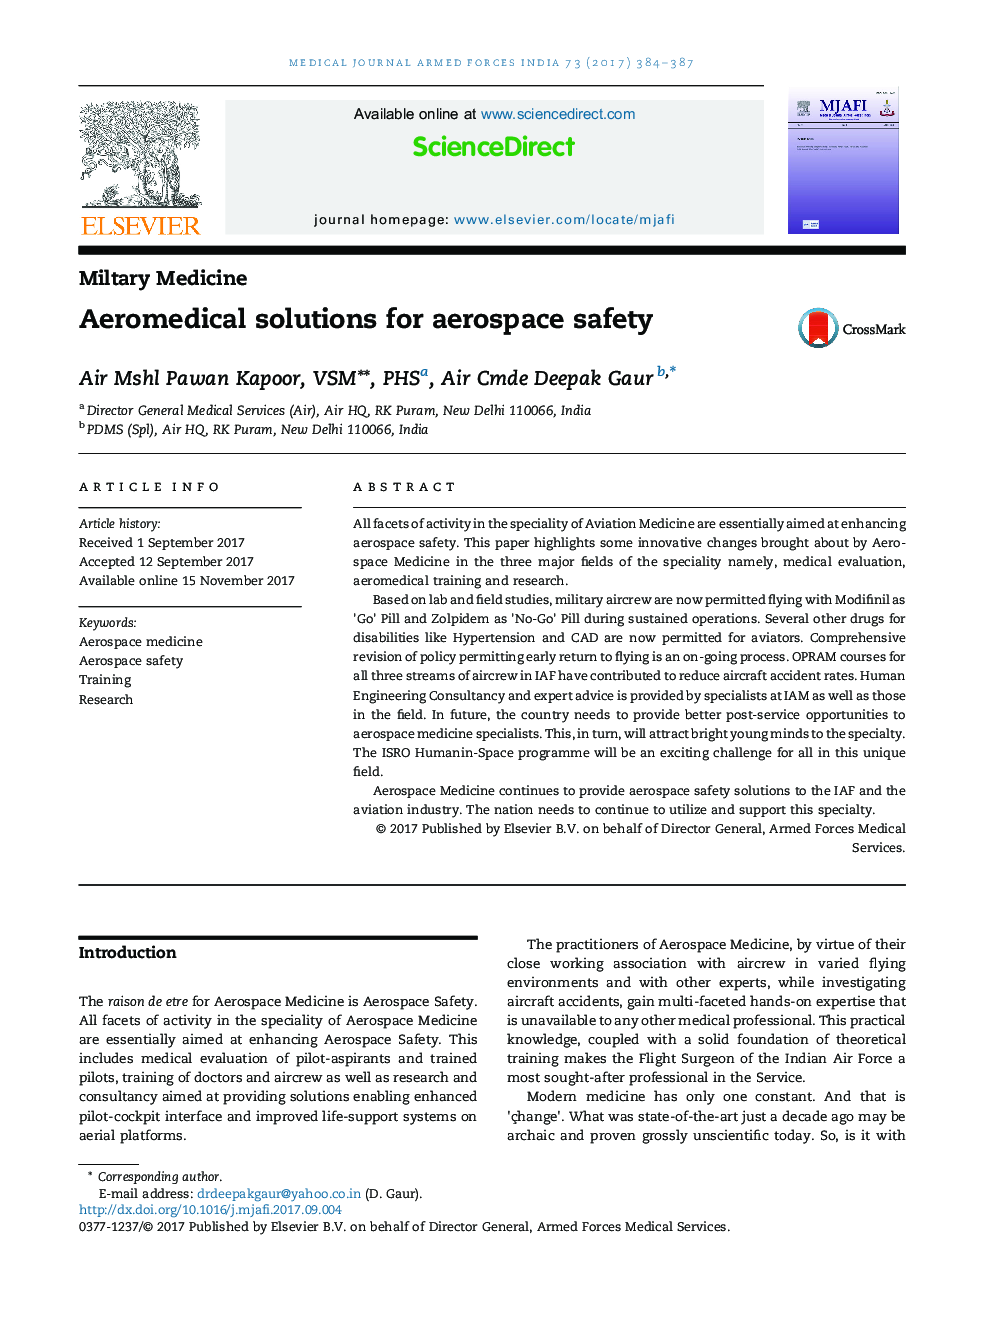 Aeromedical solutions for aerospace safety